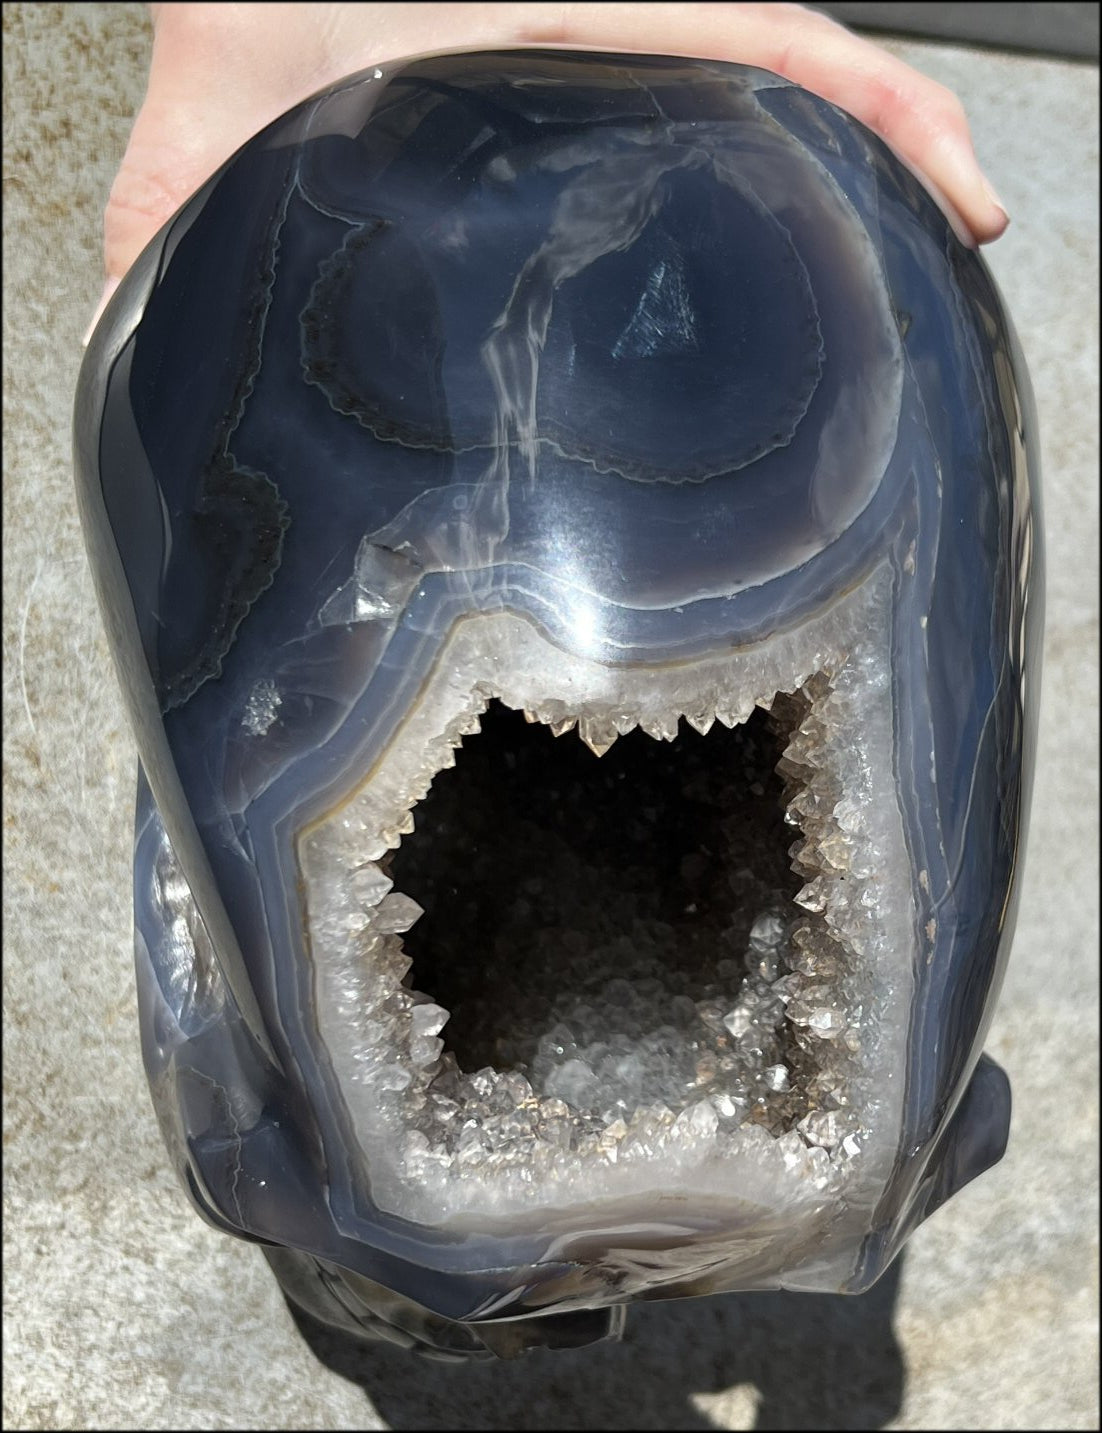 HUGE Agate Geode Crystal Skull with Fantastic Druzy crystals, Dendritic inclusions - 14lbs+8 3/4